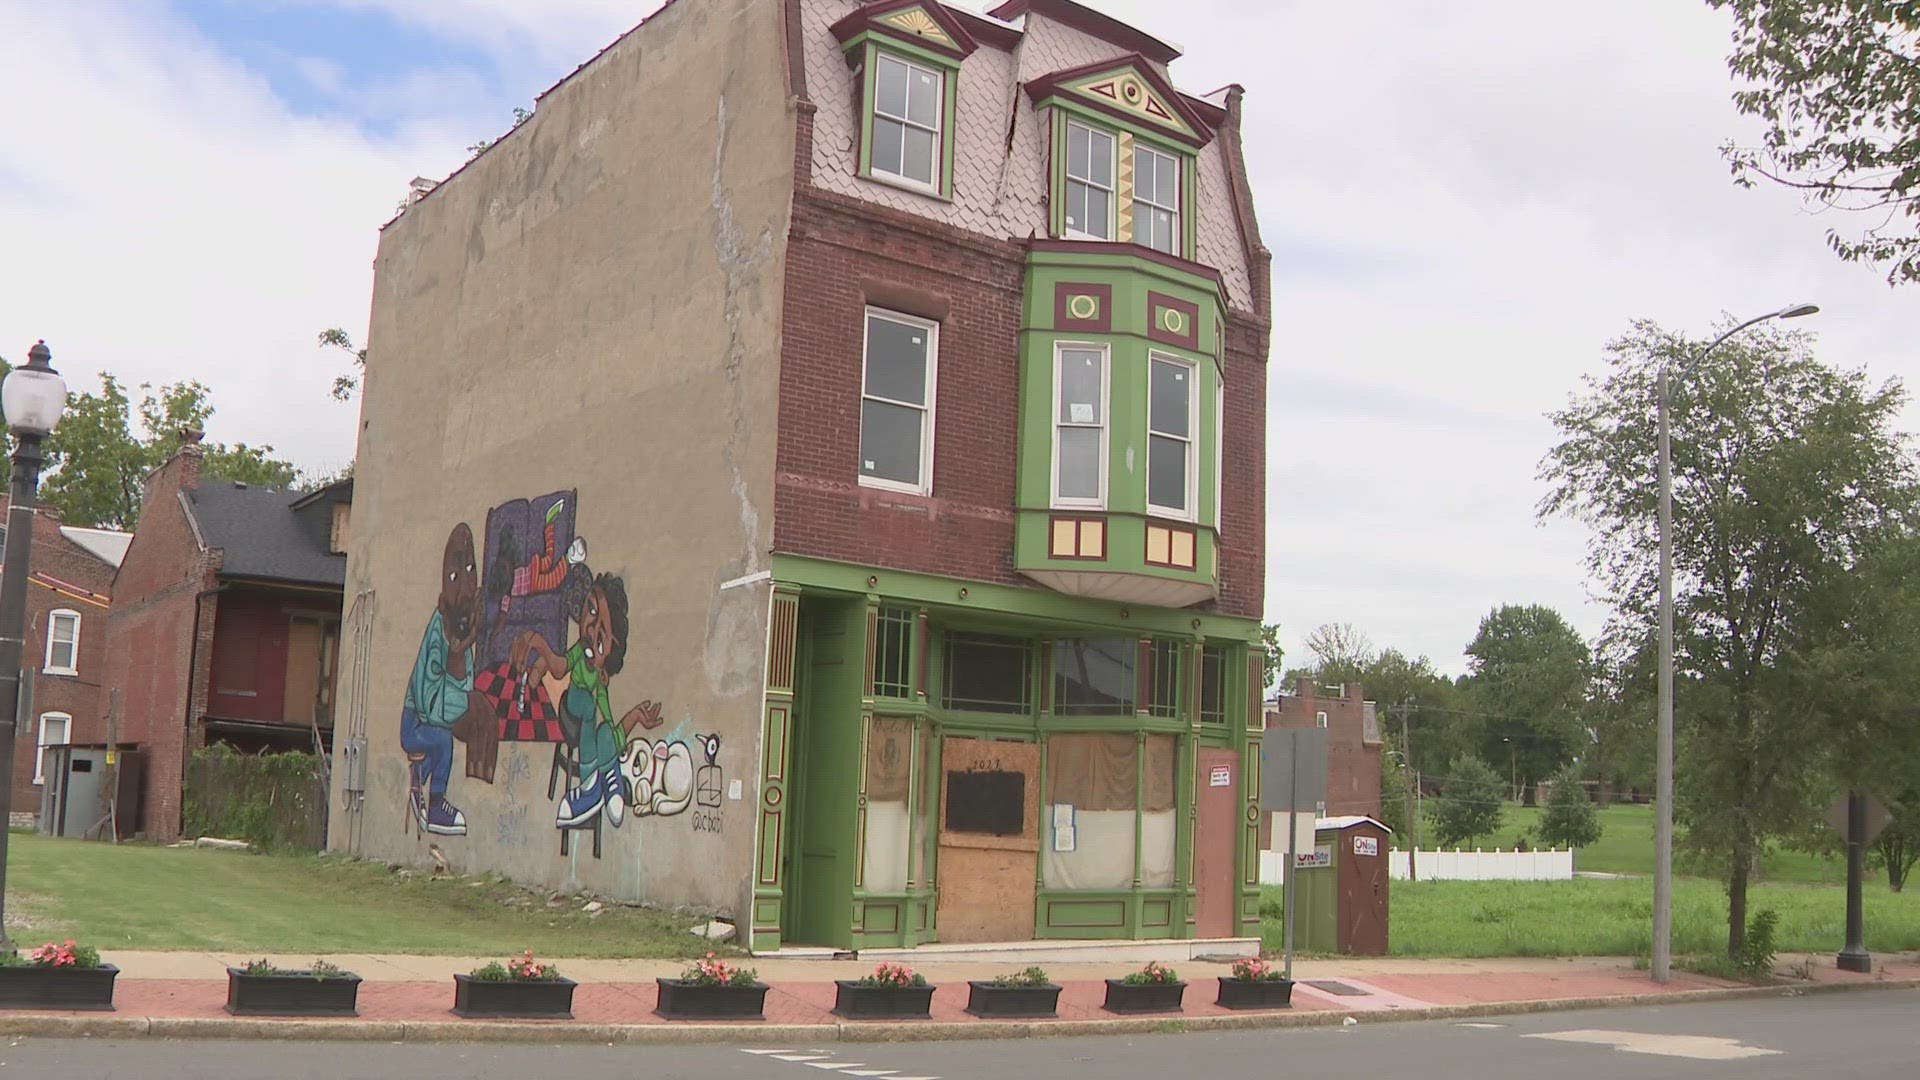 The Vacancy Strategy Initiative will address the ongoing challenge of vacant and abandoned properties. St. Louis leaders launched the initiative Tuesday.